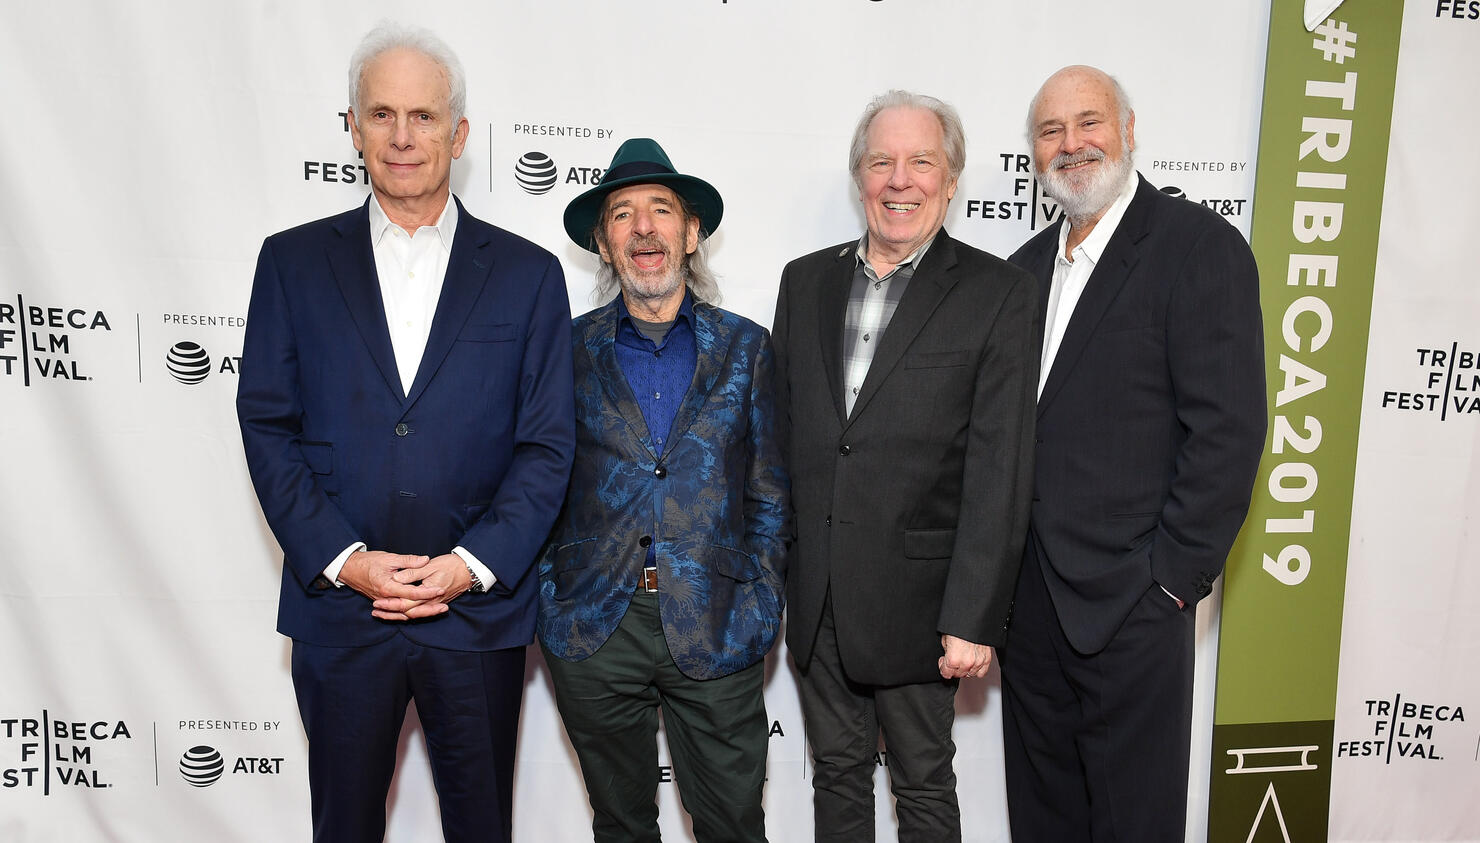 "This Is Spinal Tap" 35th Anniversary - 2019 Tribeca Film Festival